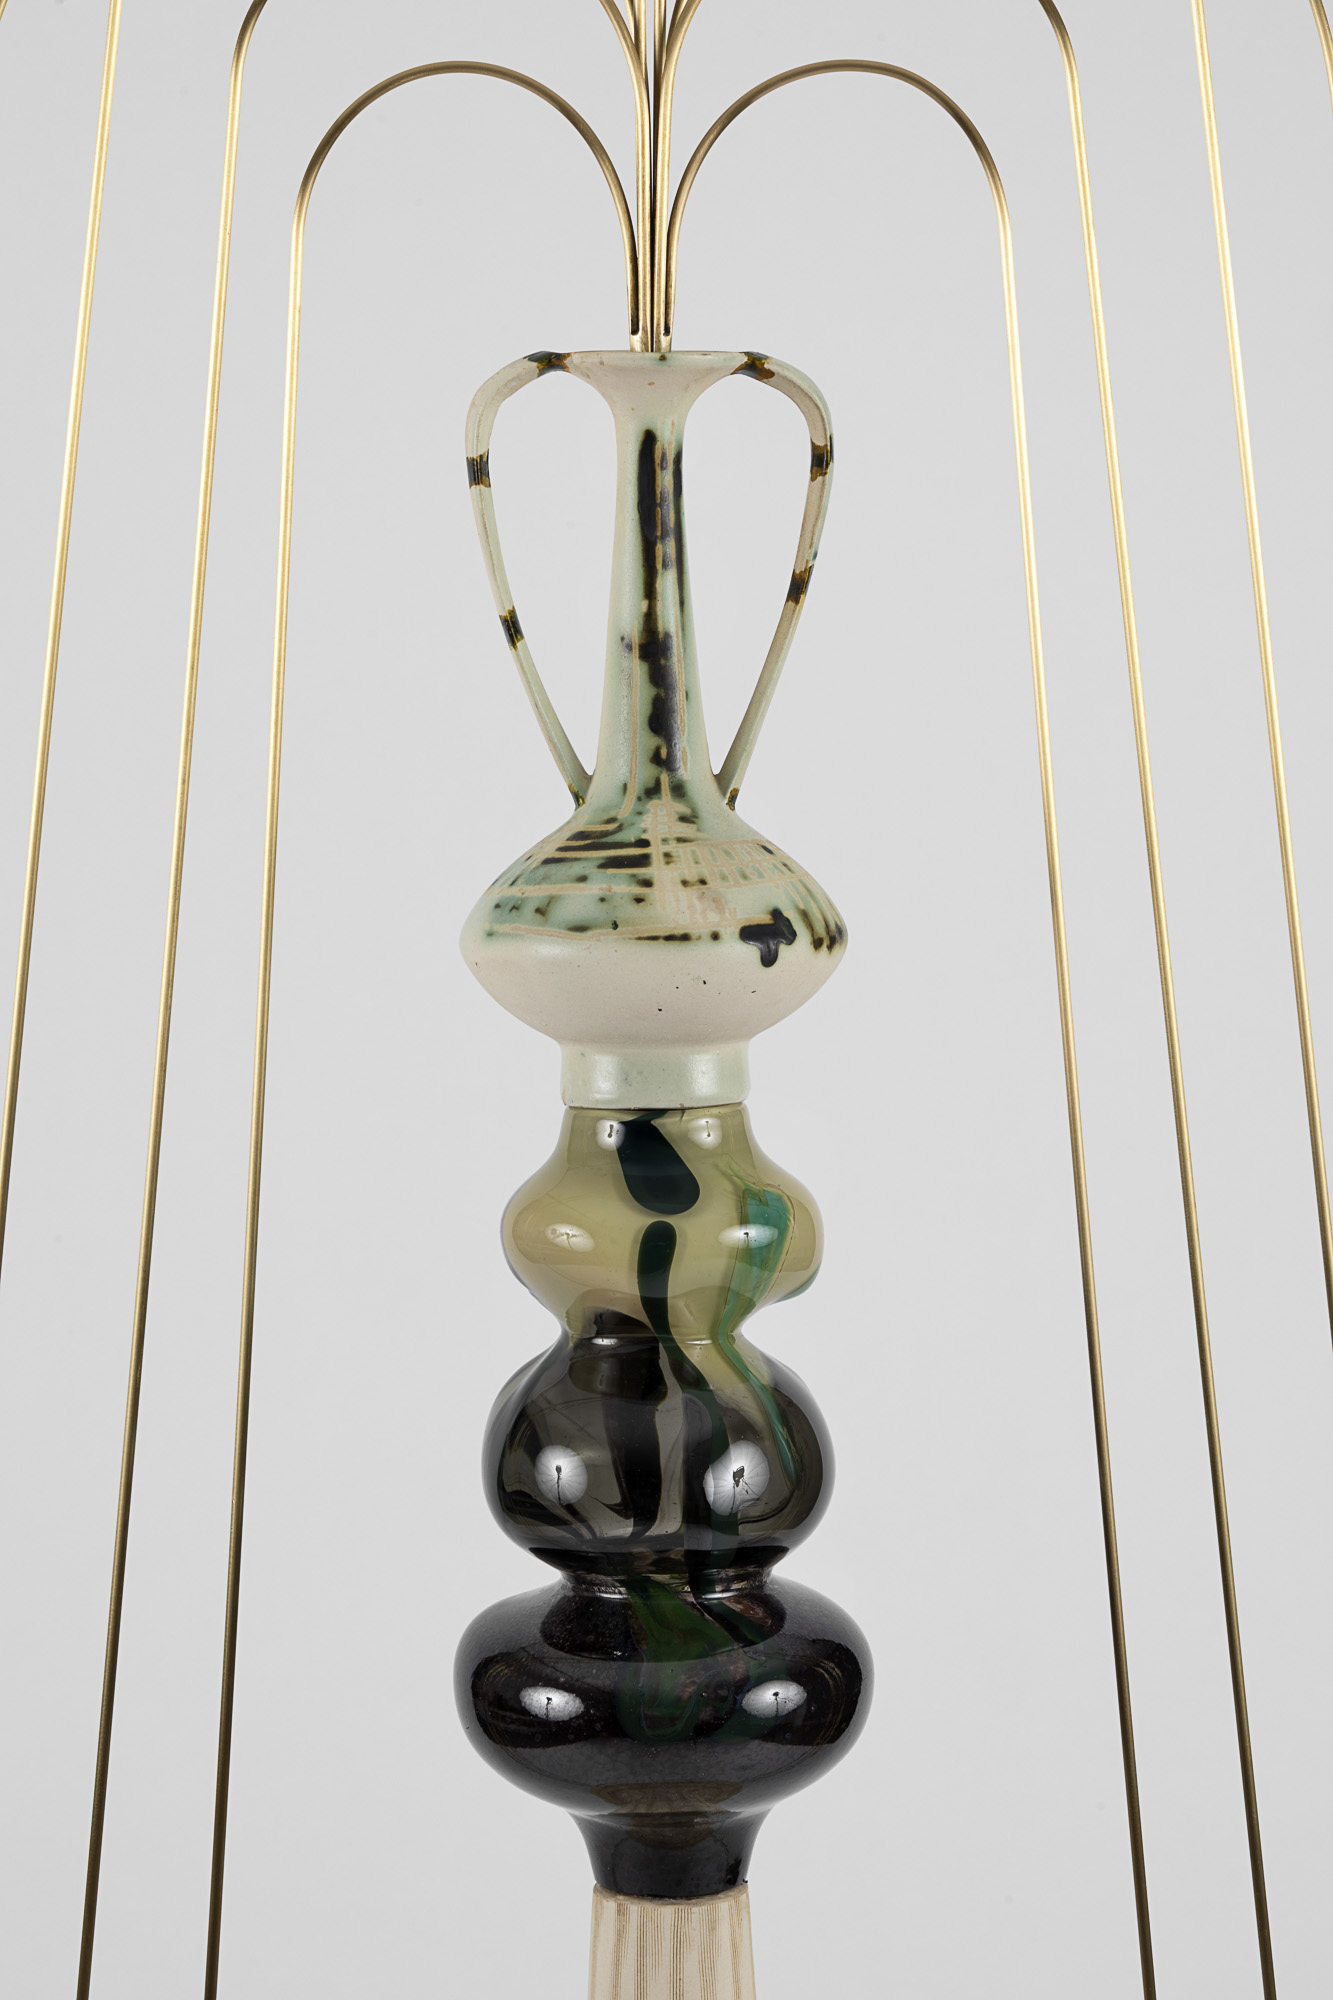 "Aspects of Existence",
2021,
Glass, Brass and found Israeli ceramics from the factories of Kfar Menachem & Harsa,
164x73 cm